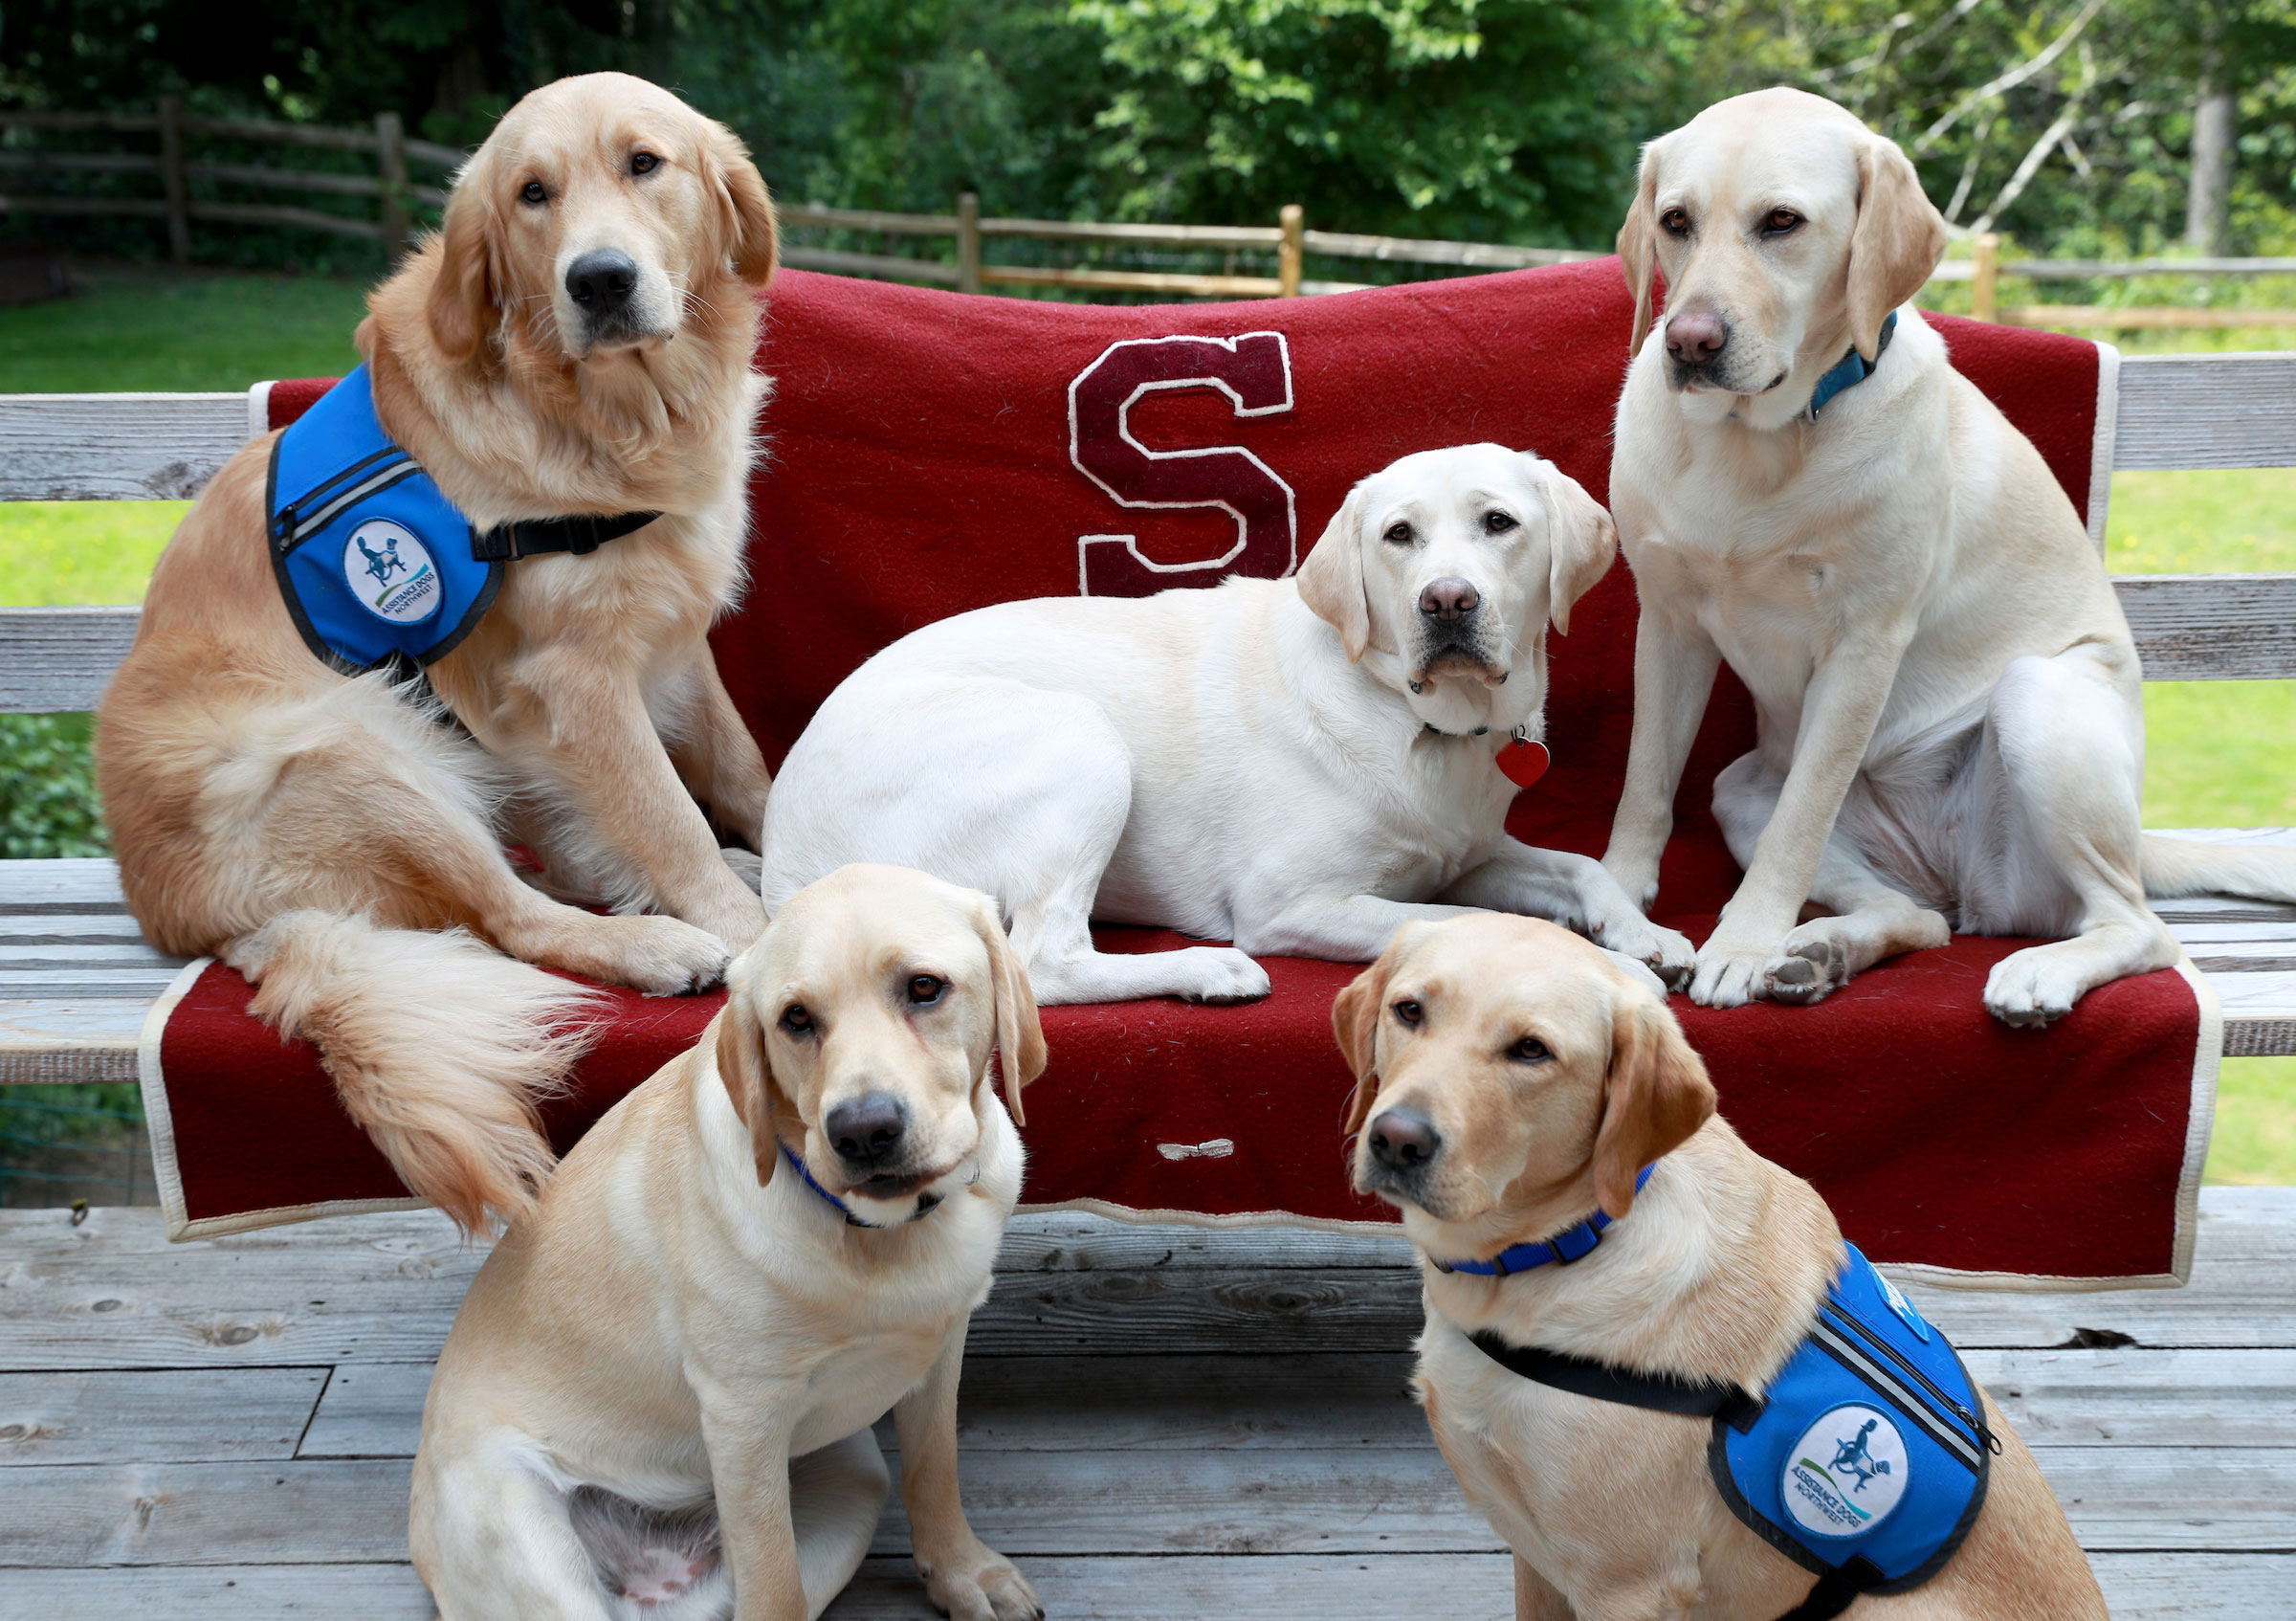 ADNW pups pose with a letterman blanket belonging to Maureen’s father Paul Dempsey who, along with Maureen’s mother Beverly Beswick, graduated from SU in 1958.